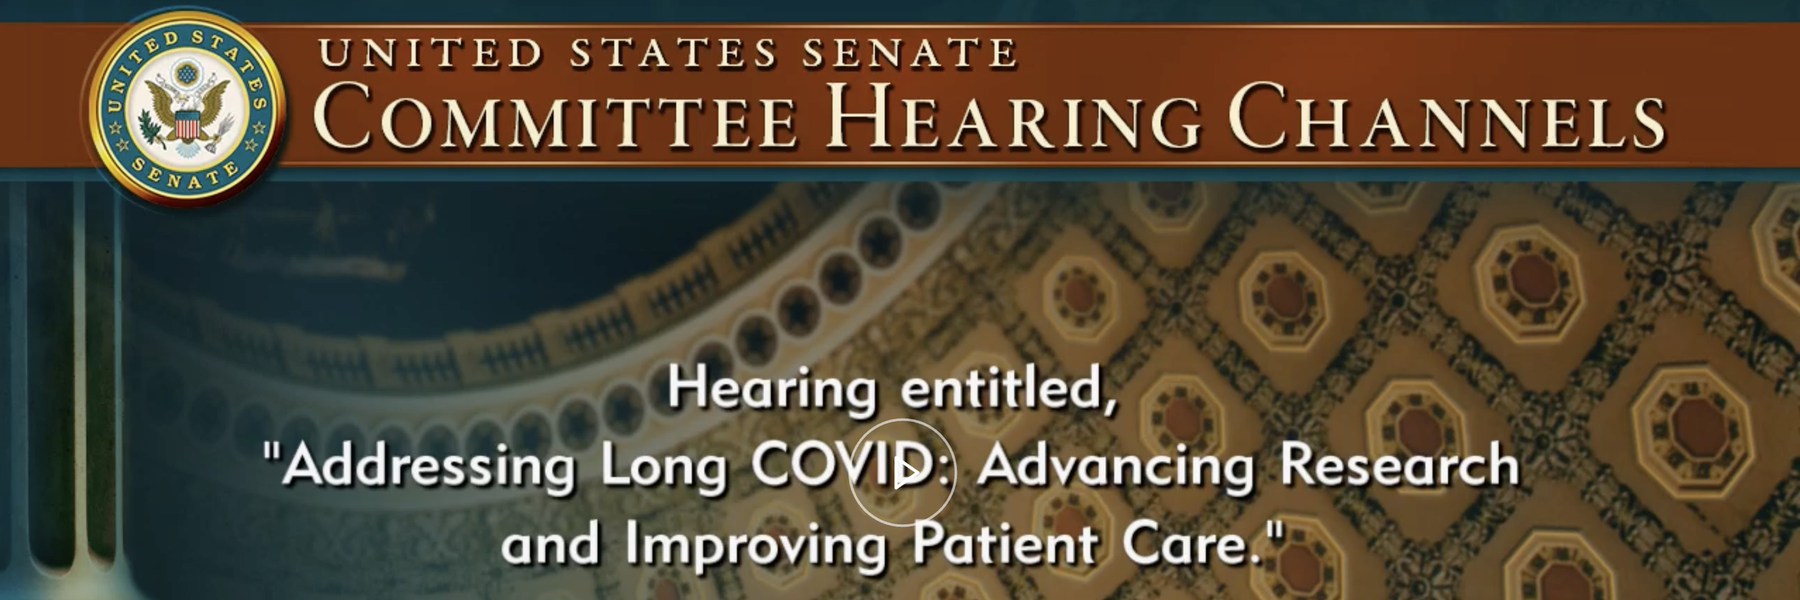 U.S. senators call for better oversight of federal health agency following criticism of Long Covid program